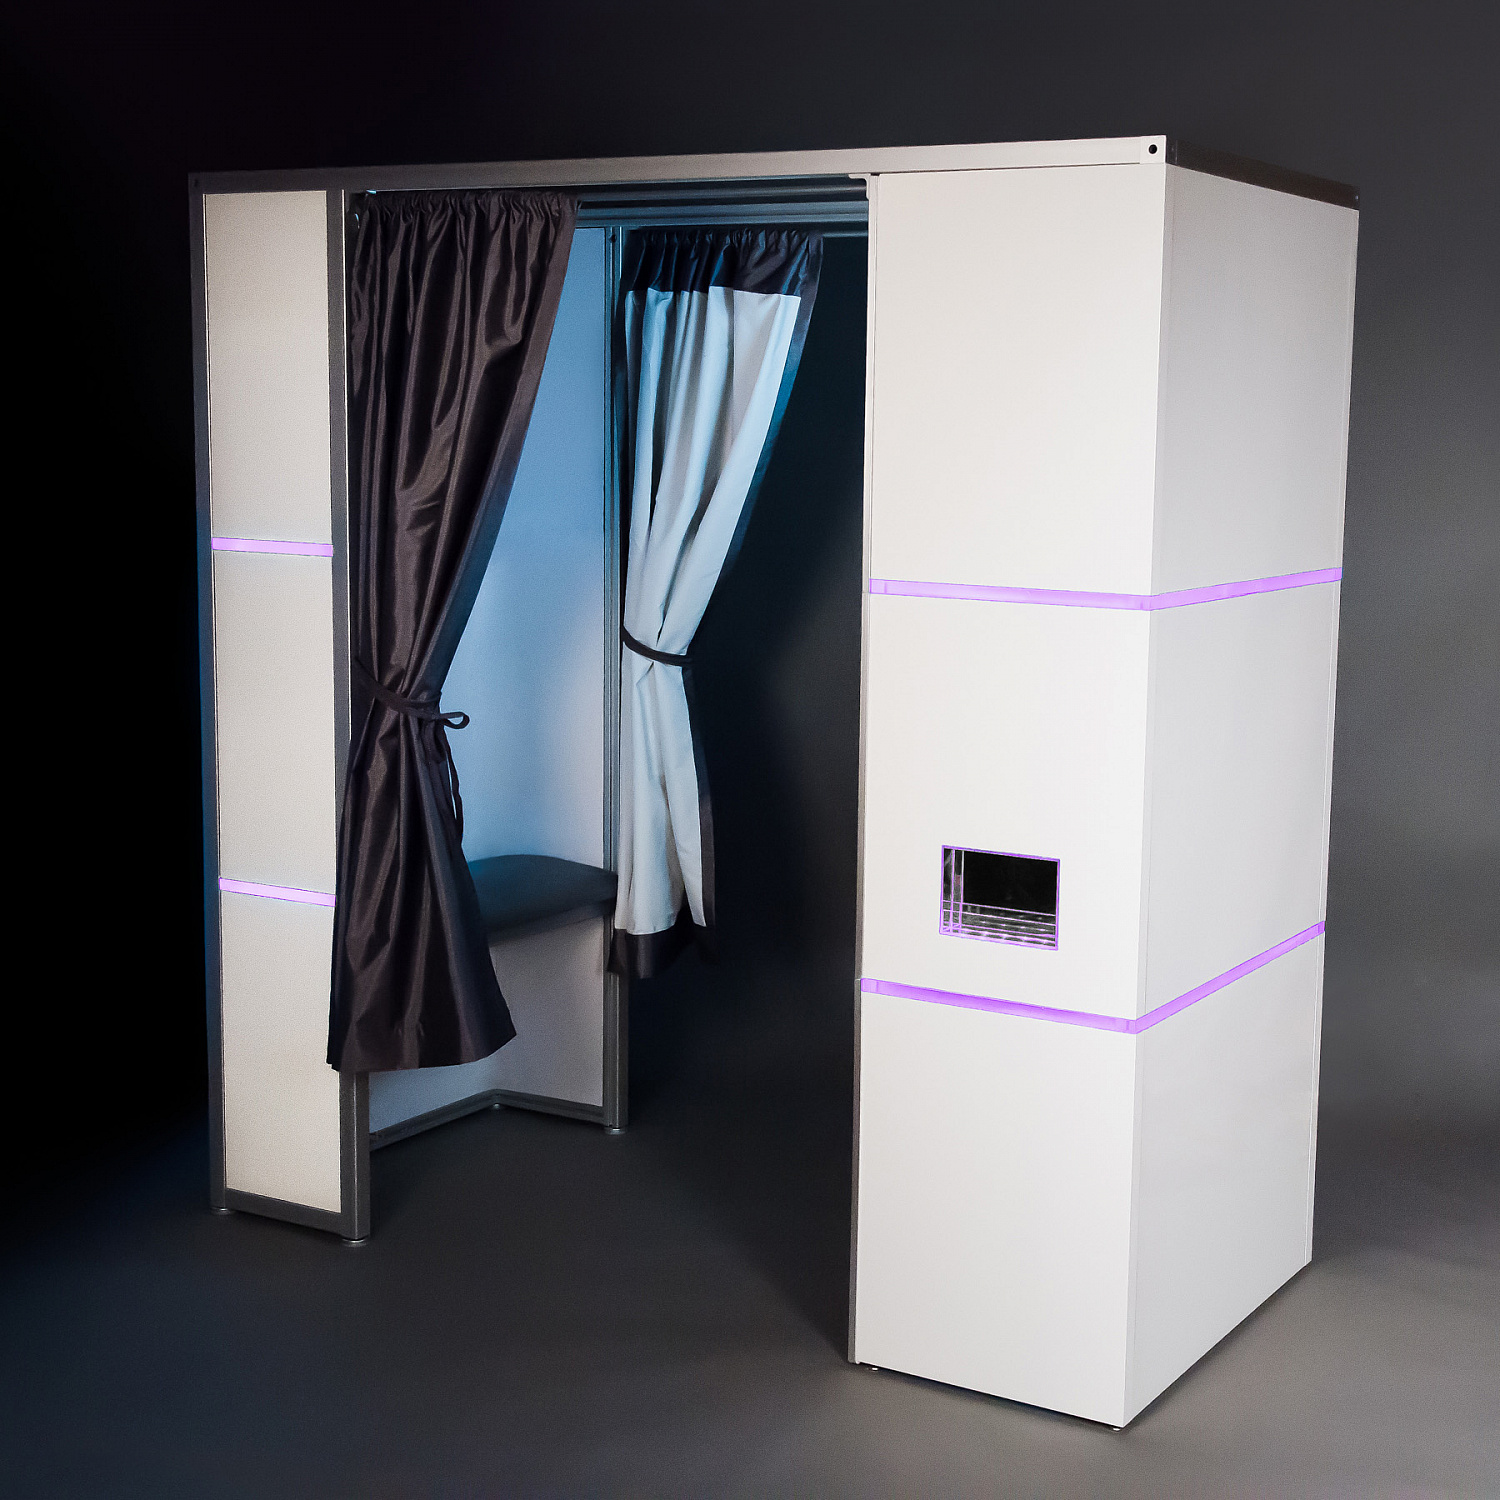 Enclosed Photo Booth Rental | BorsellinoPhotoBooth_small.jpg